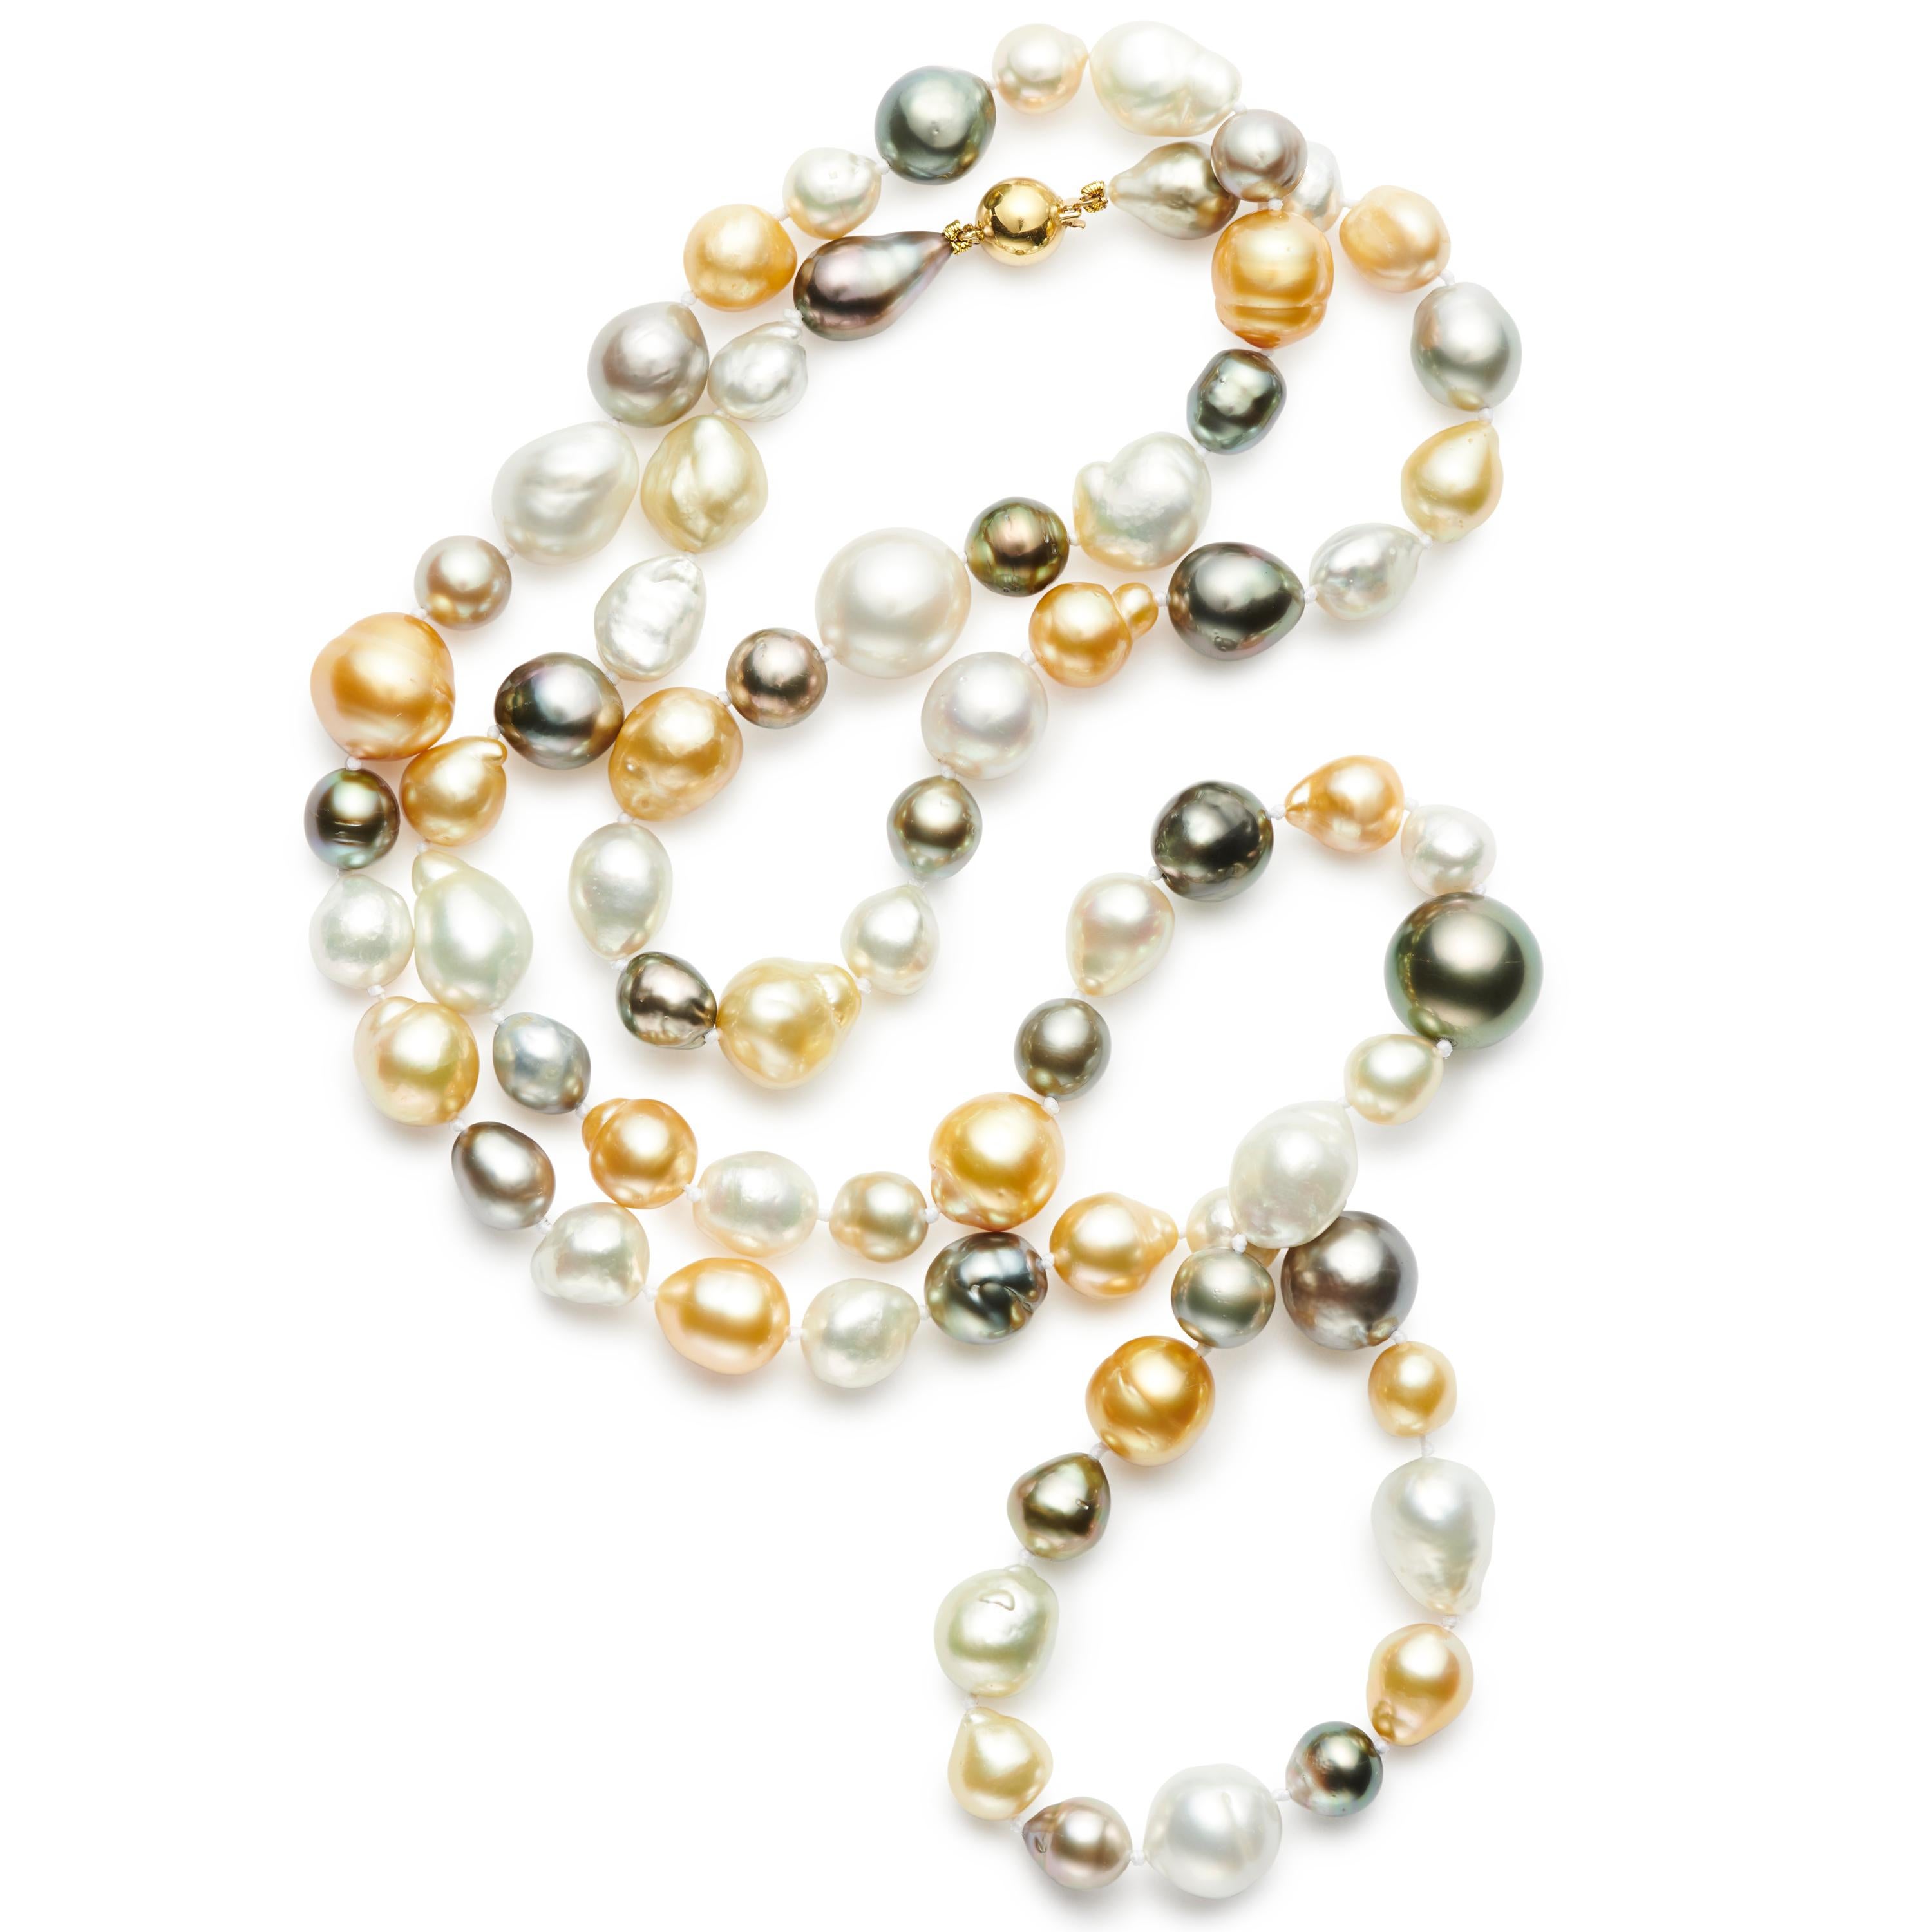 A magnificent mix of styles, sizes and hues make up this 39” beautifully hand-knotted strand of pearls. Natural Golden, Multi-Colored Tahitian, White round and Baroque South Sea Pearls are secured with an 18kt Gold ball clasp and can be worn doubled